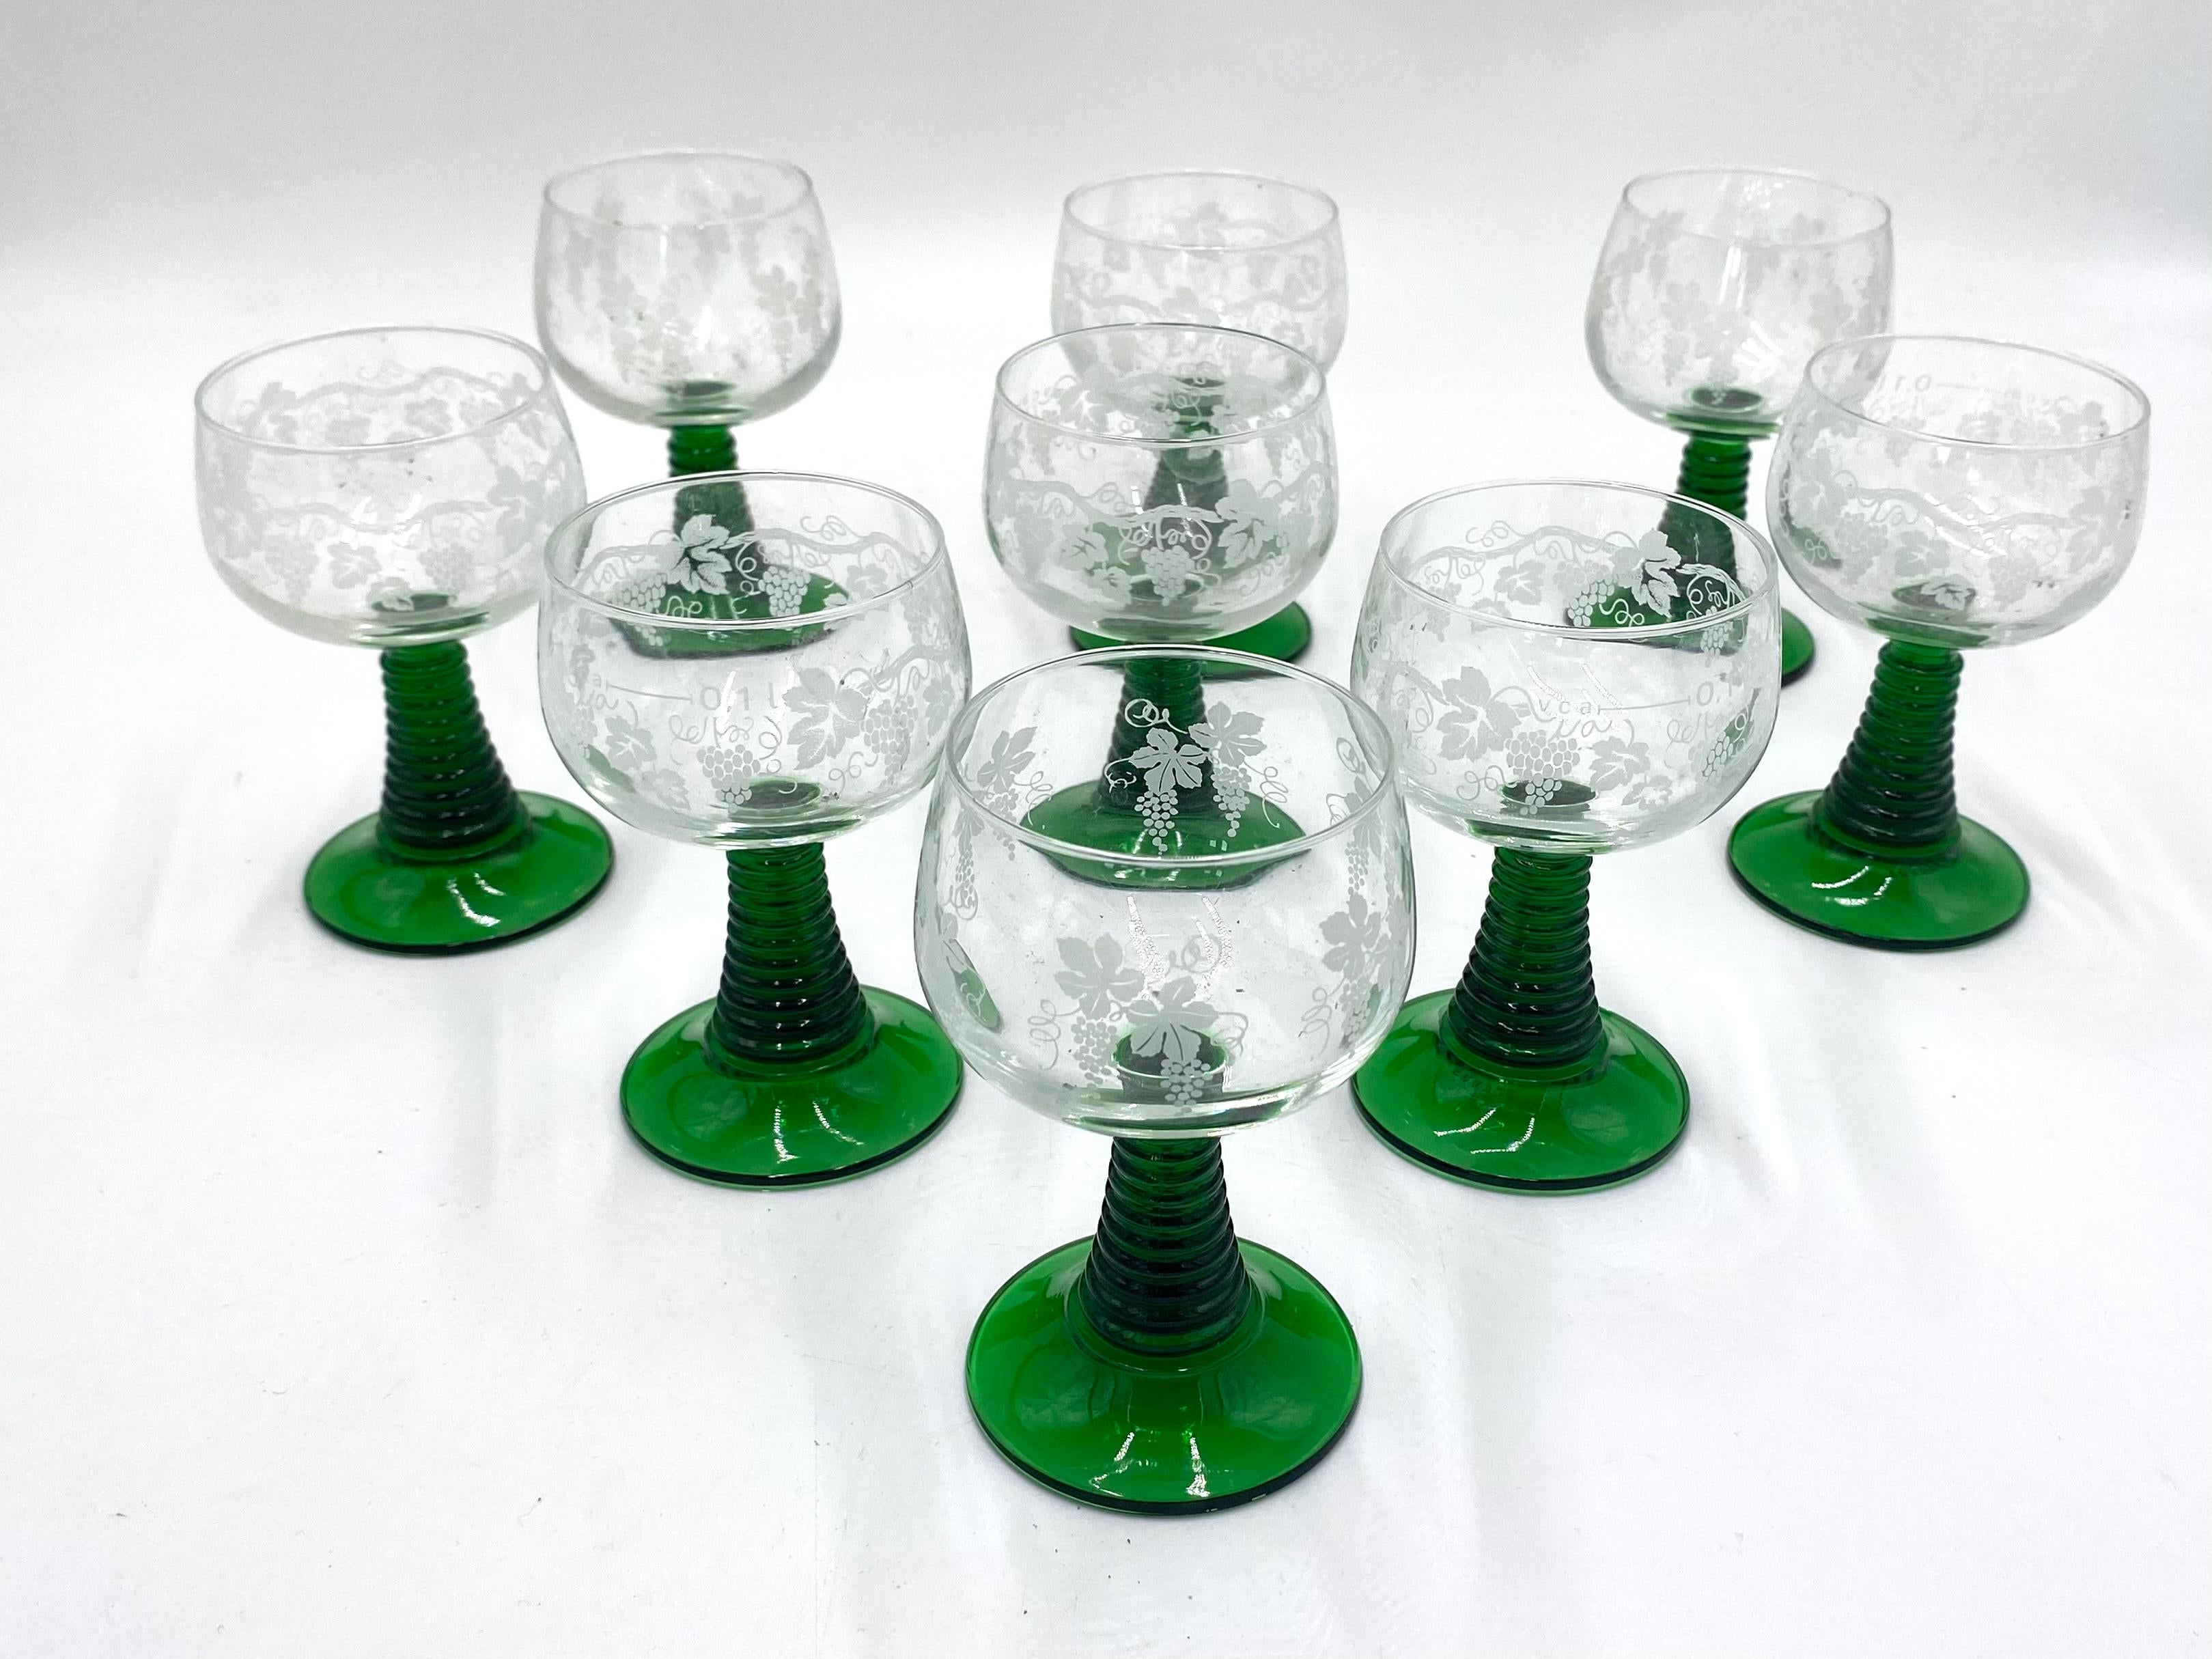 Nine glasses on a green stem with a vine motif.

Made in France by Luminarc in the mid-20th century.

Very good condition, no damage

height 12 cm, diameter 7 cm